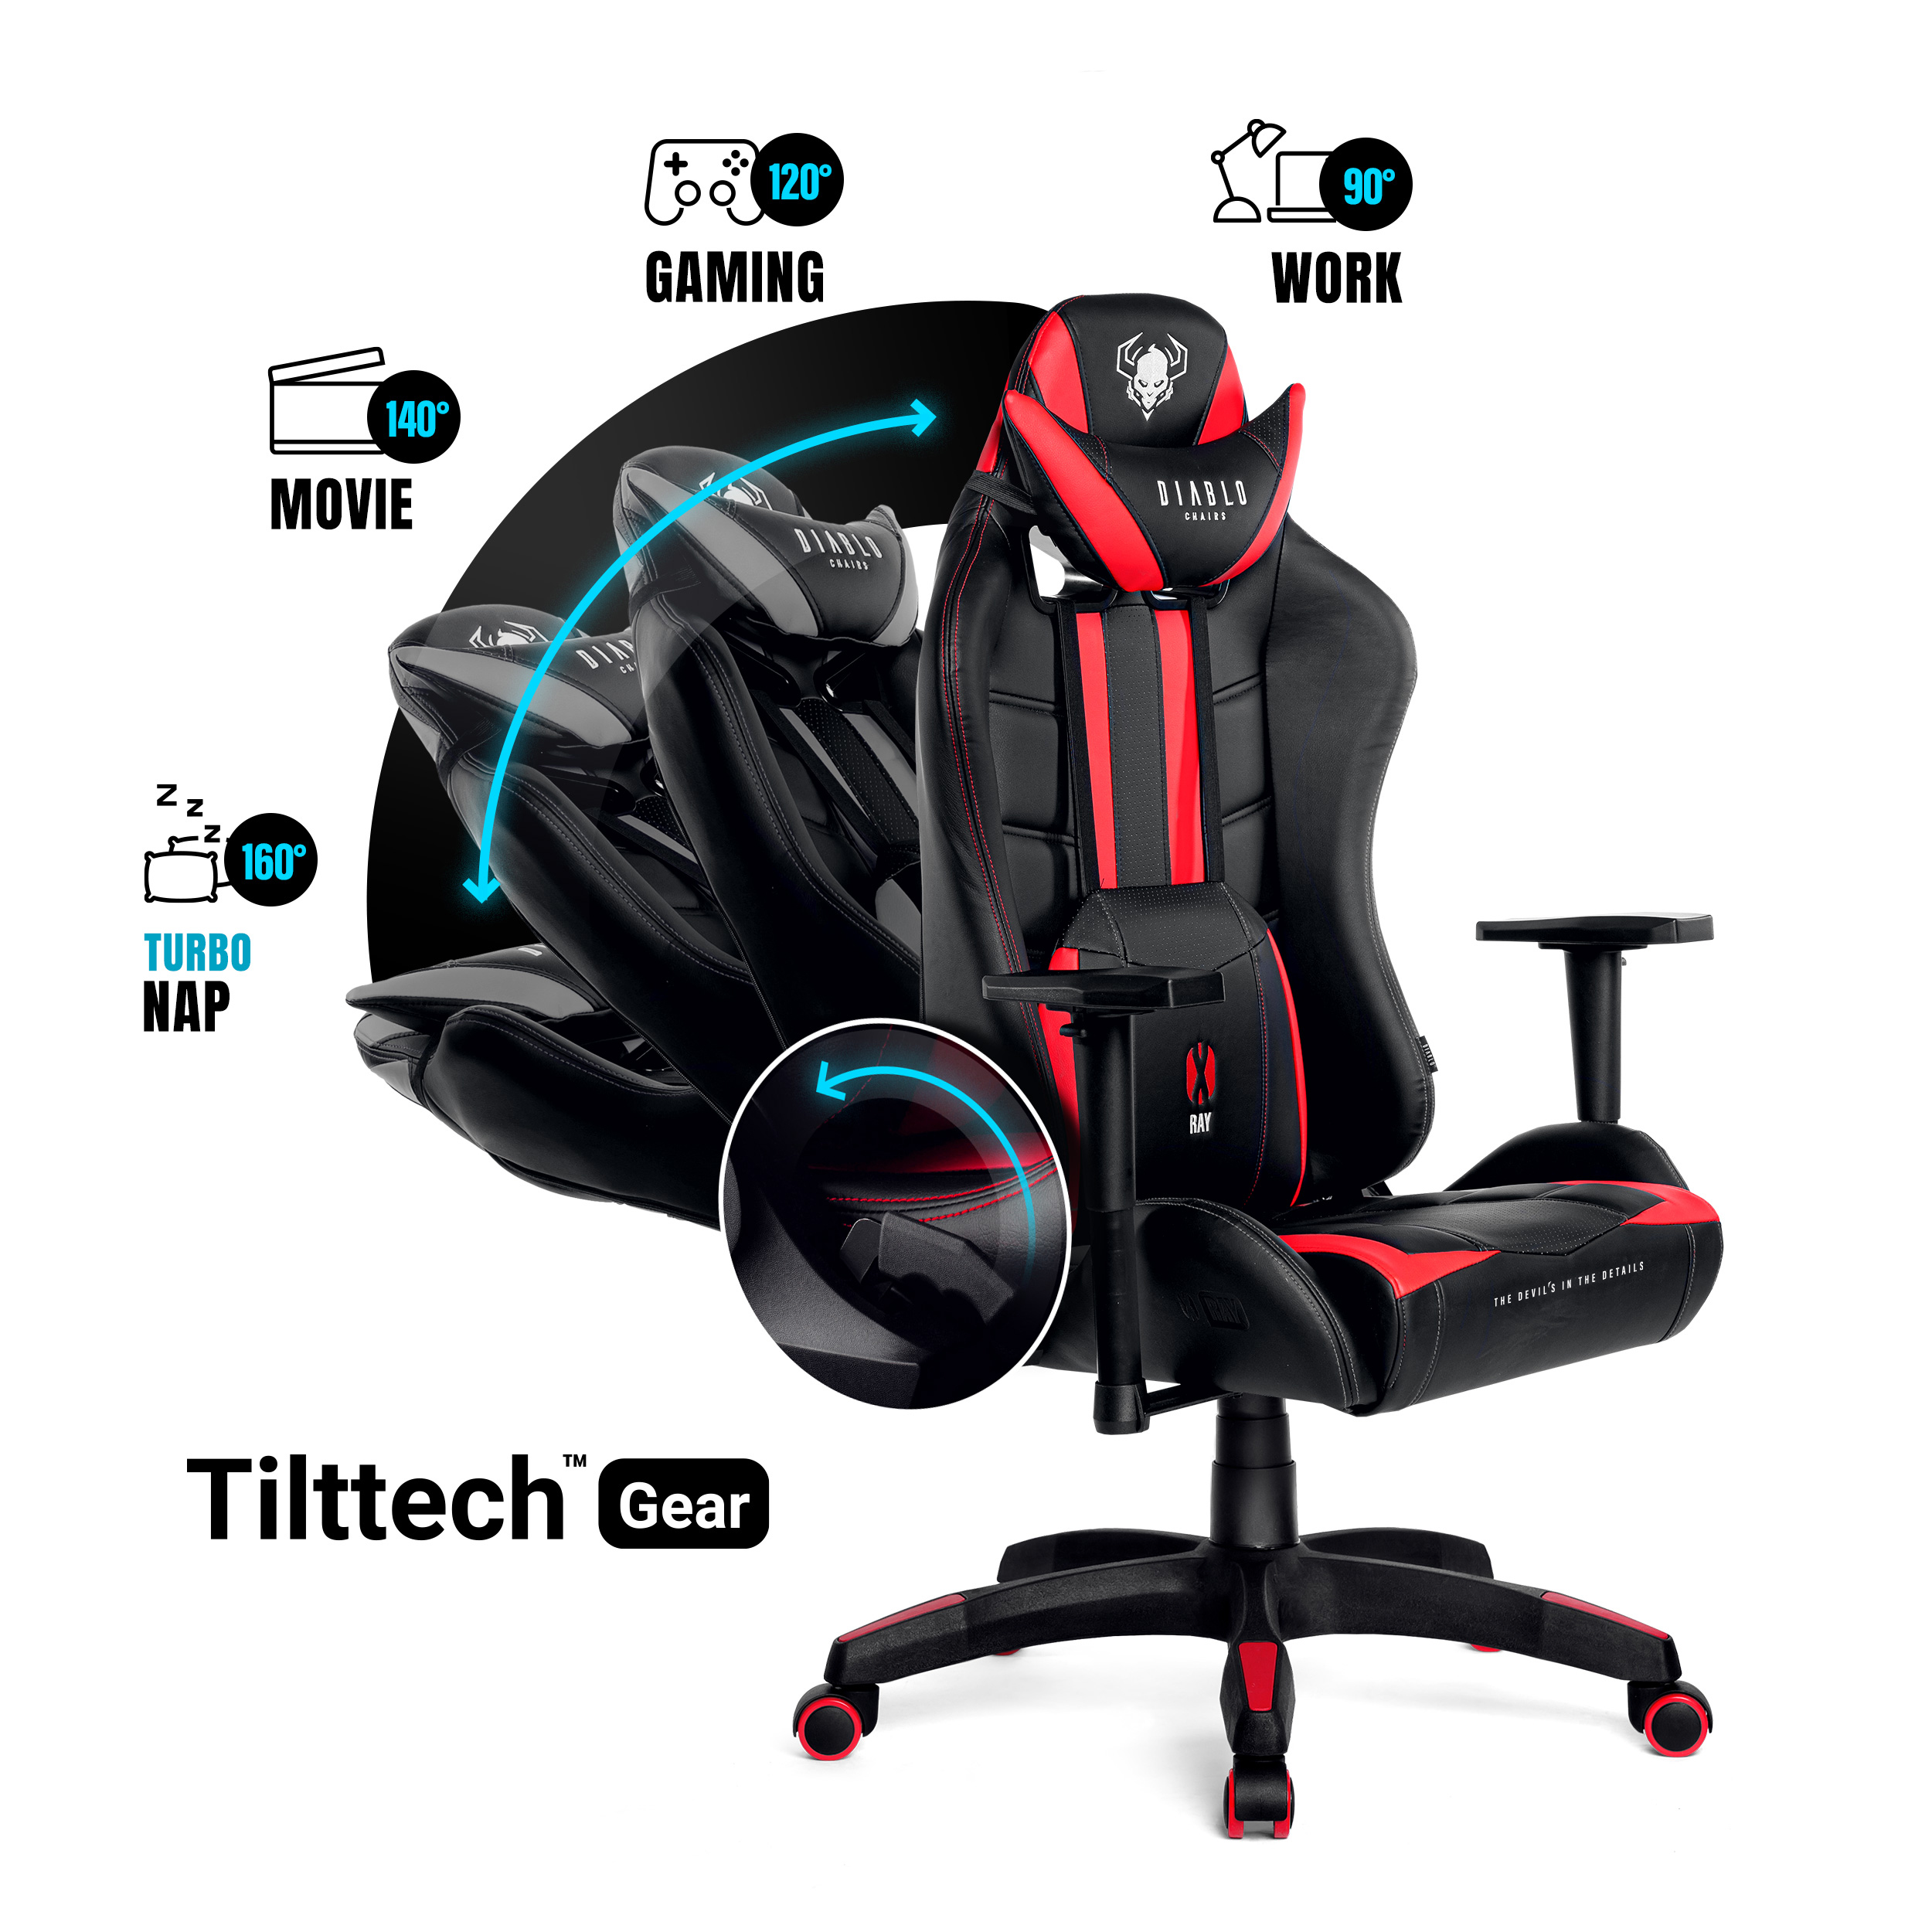 DIABLO CHAIRS STUHL X-RAY Chair, Gaming NORMAL black/red GAMING